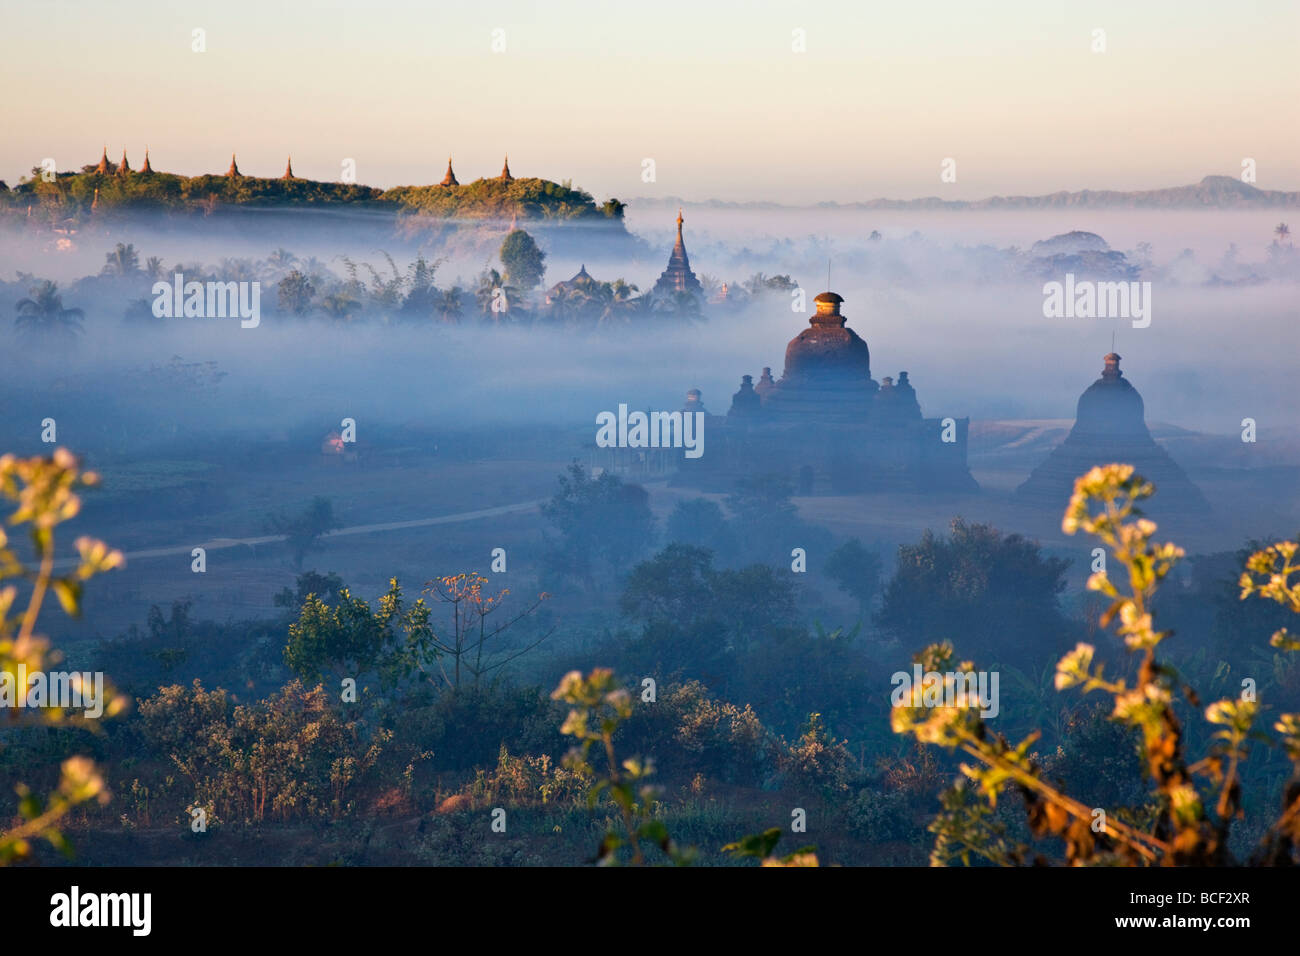 As the sun rises, the early morning mist shrouding the historic temples of Mrauk U begins to lift. Stock Photo